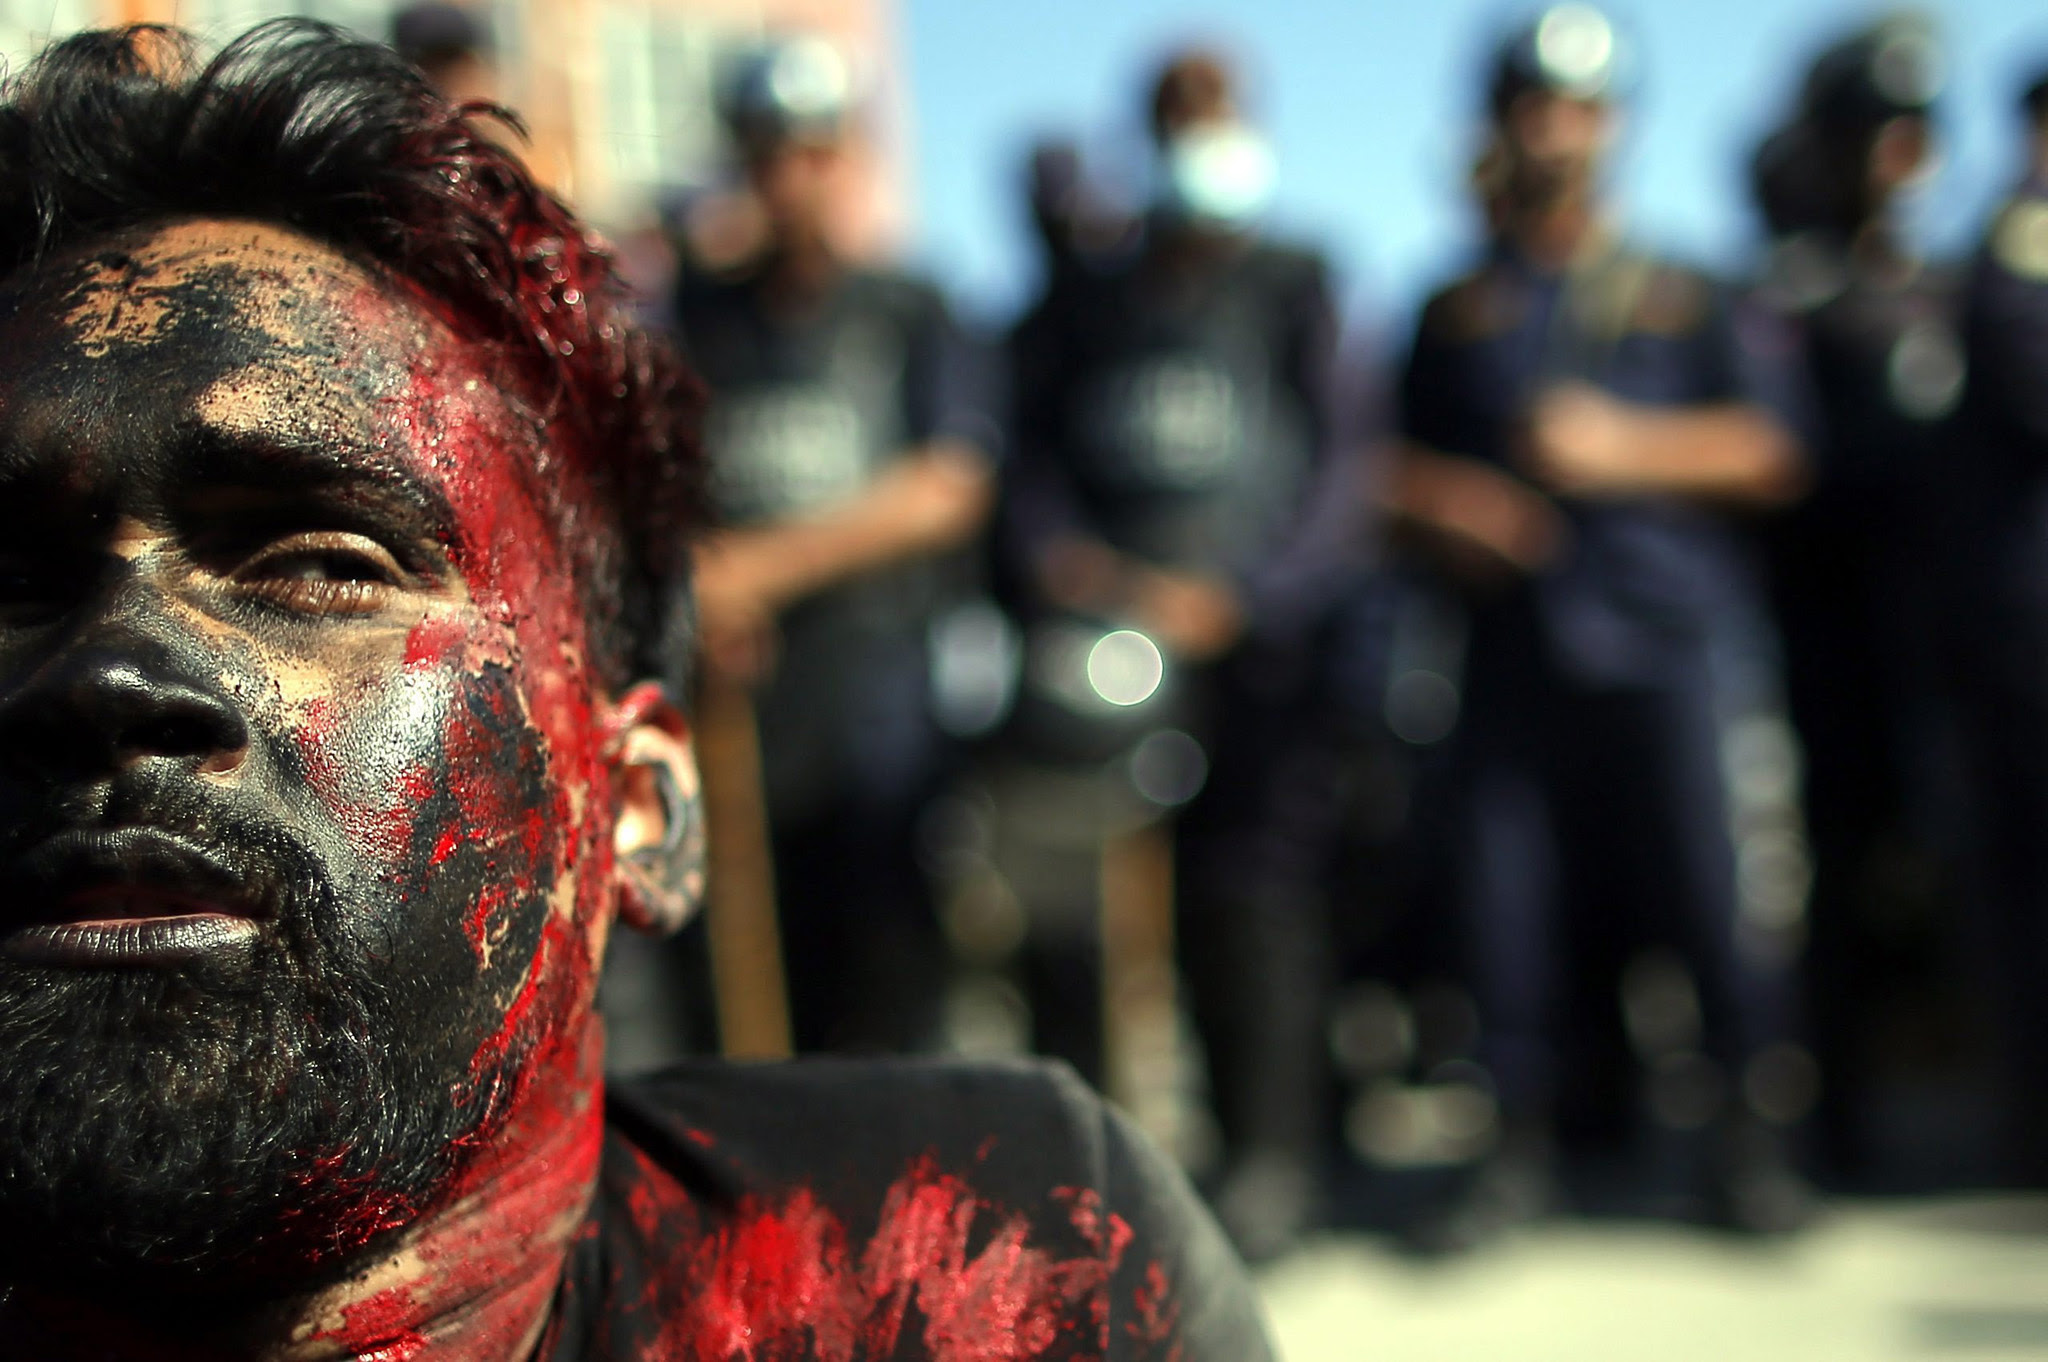 Artist belonging to Nepalese ethnic-based Madhesh political parties acts as an injured activist while protesting to mark the Nepal's first constitution day in Kathmandu, Nepal, 19 September 2016. Hundreds of members of Ethnic Madhesi political parties and related artists protest against the new constitution, which is celebrating by the government side on 19 September 2016. Madhesh based political parties say that this new constitution will not represent their demands which obstructs more political representation for ethnic minorities in the nation's parliament.  EPA/NARENDRA SHRESTHA